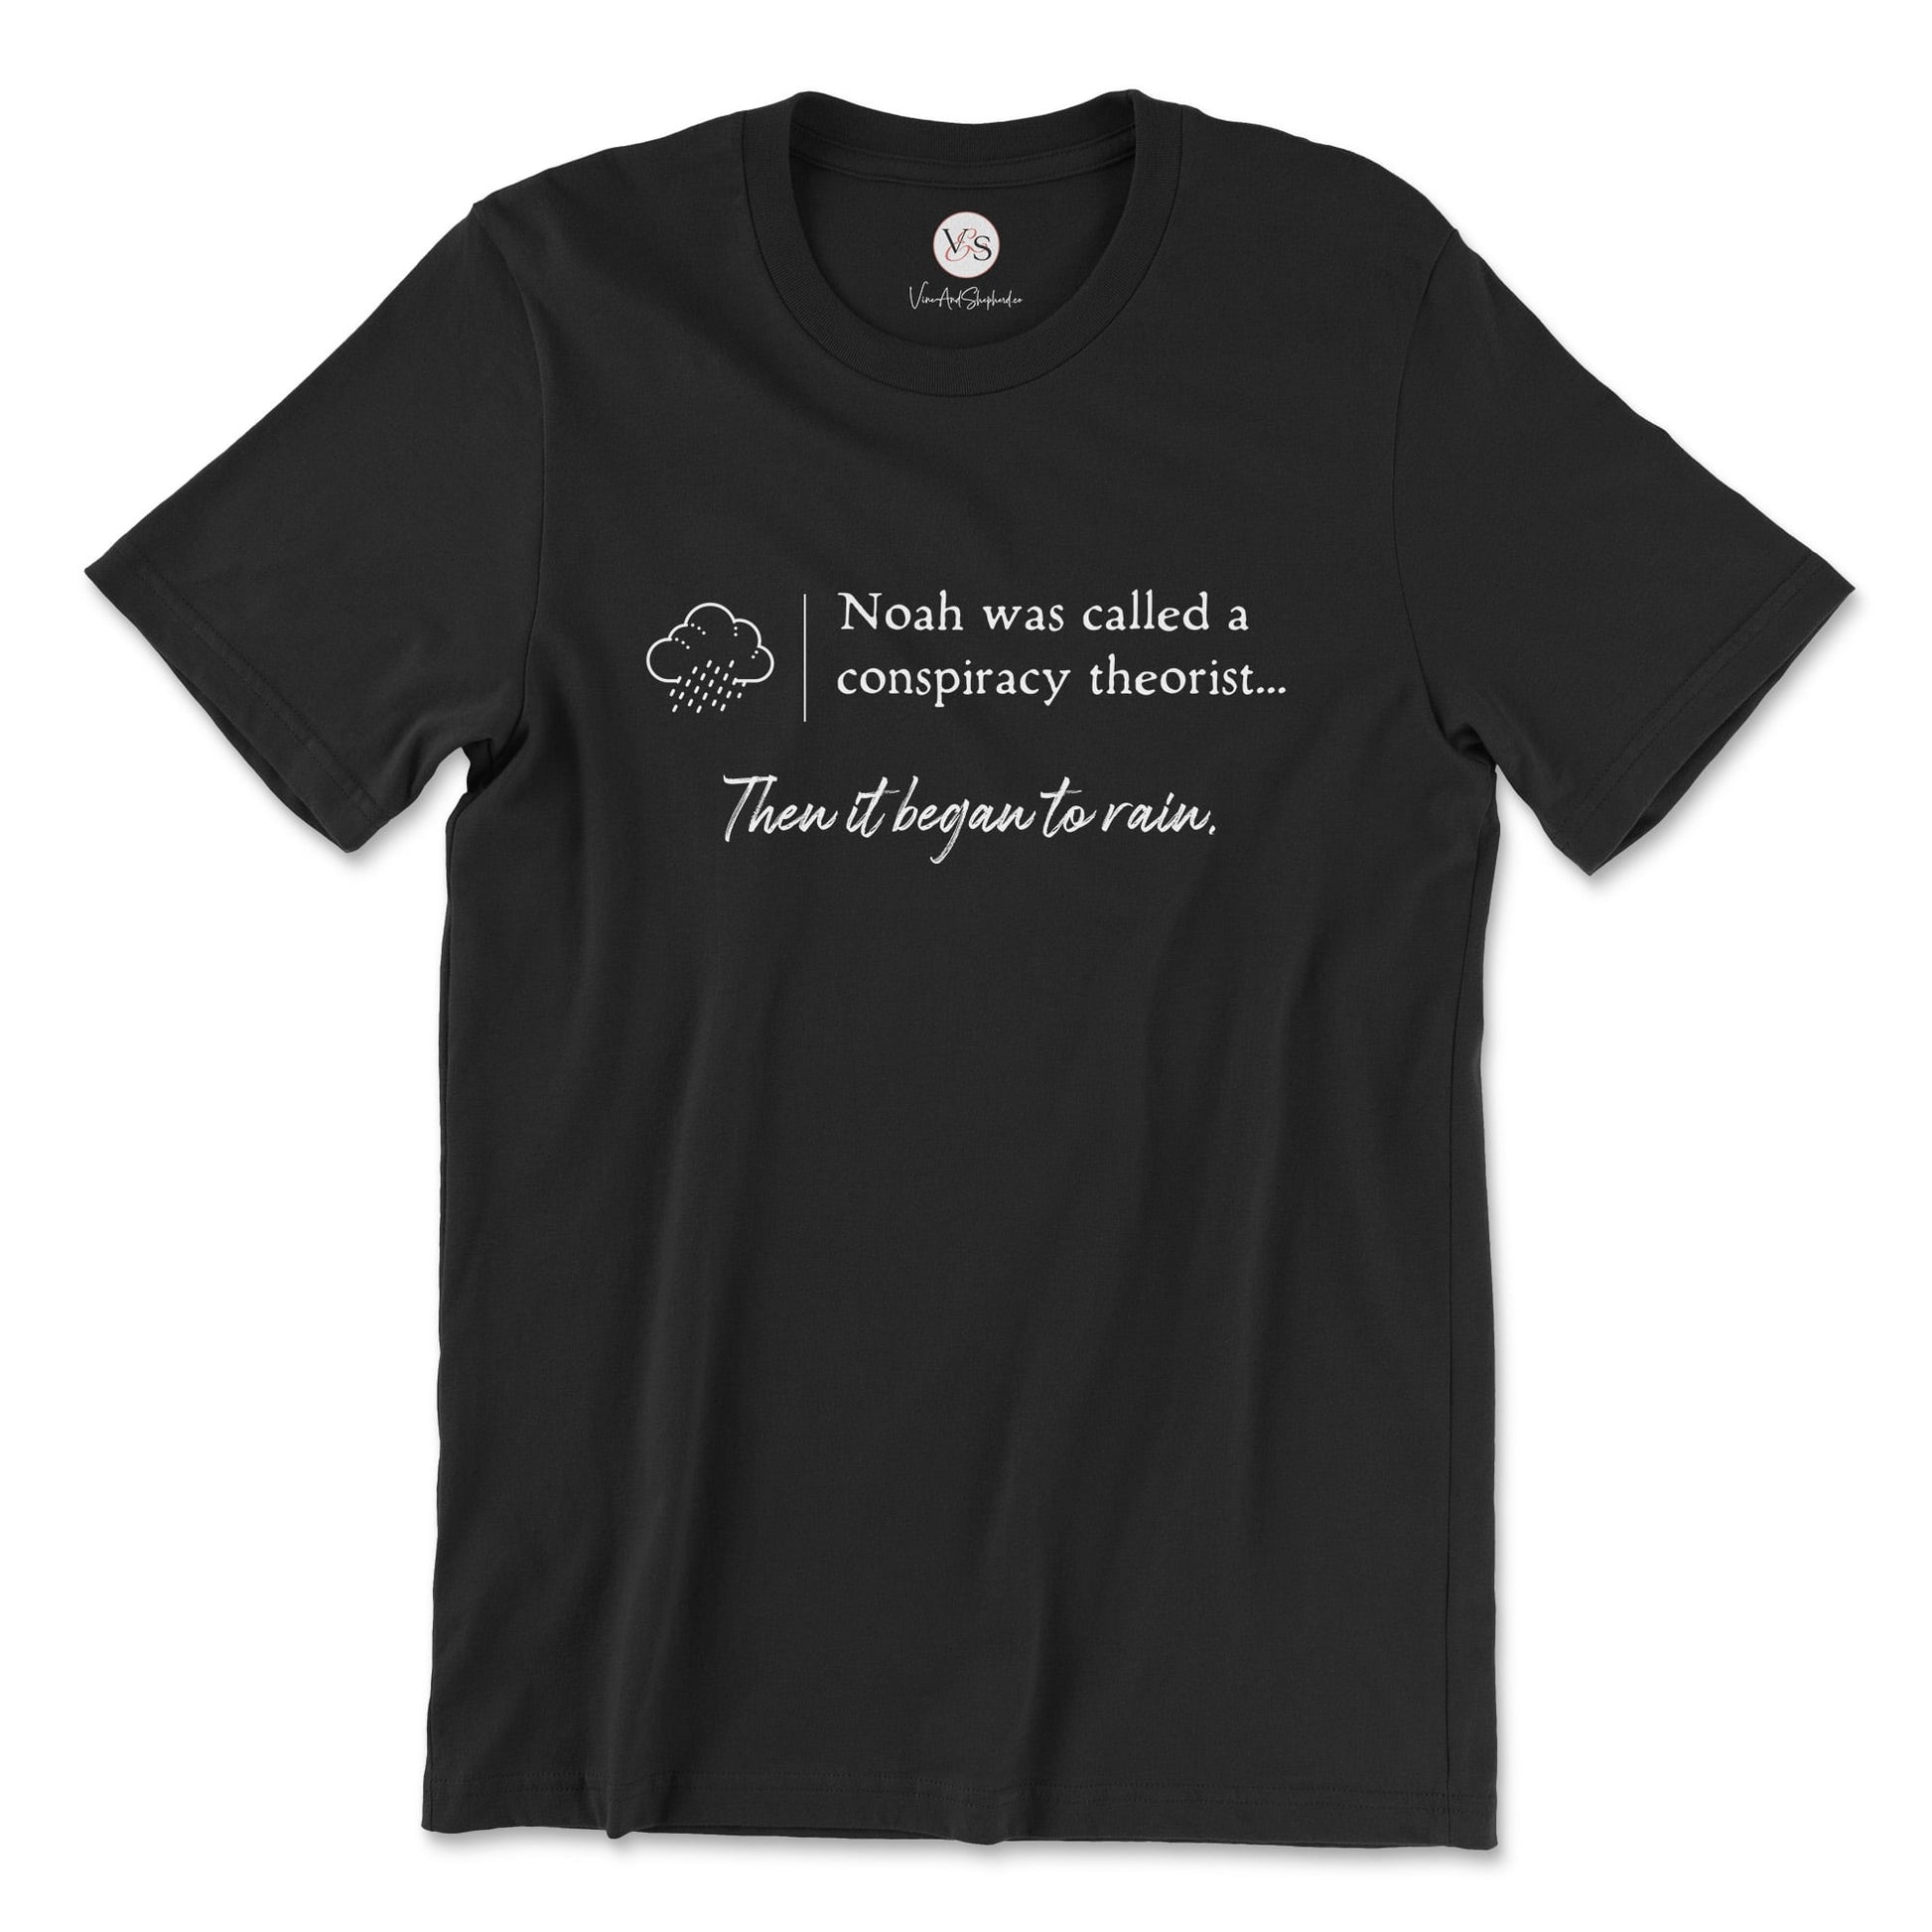 Noah was called a conspiracy theorist t-shirt in vintage black